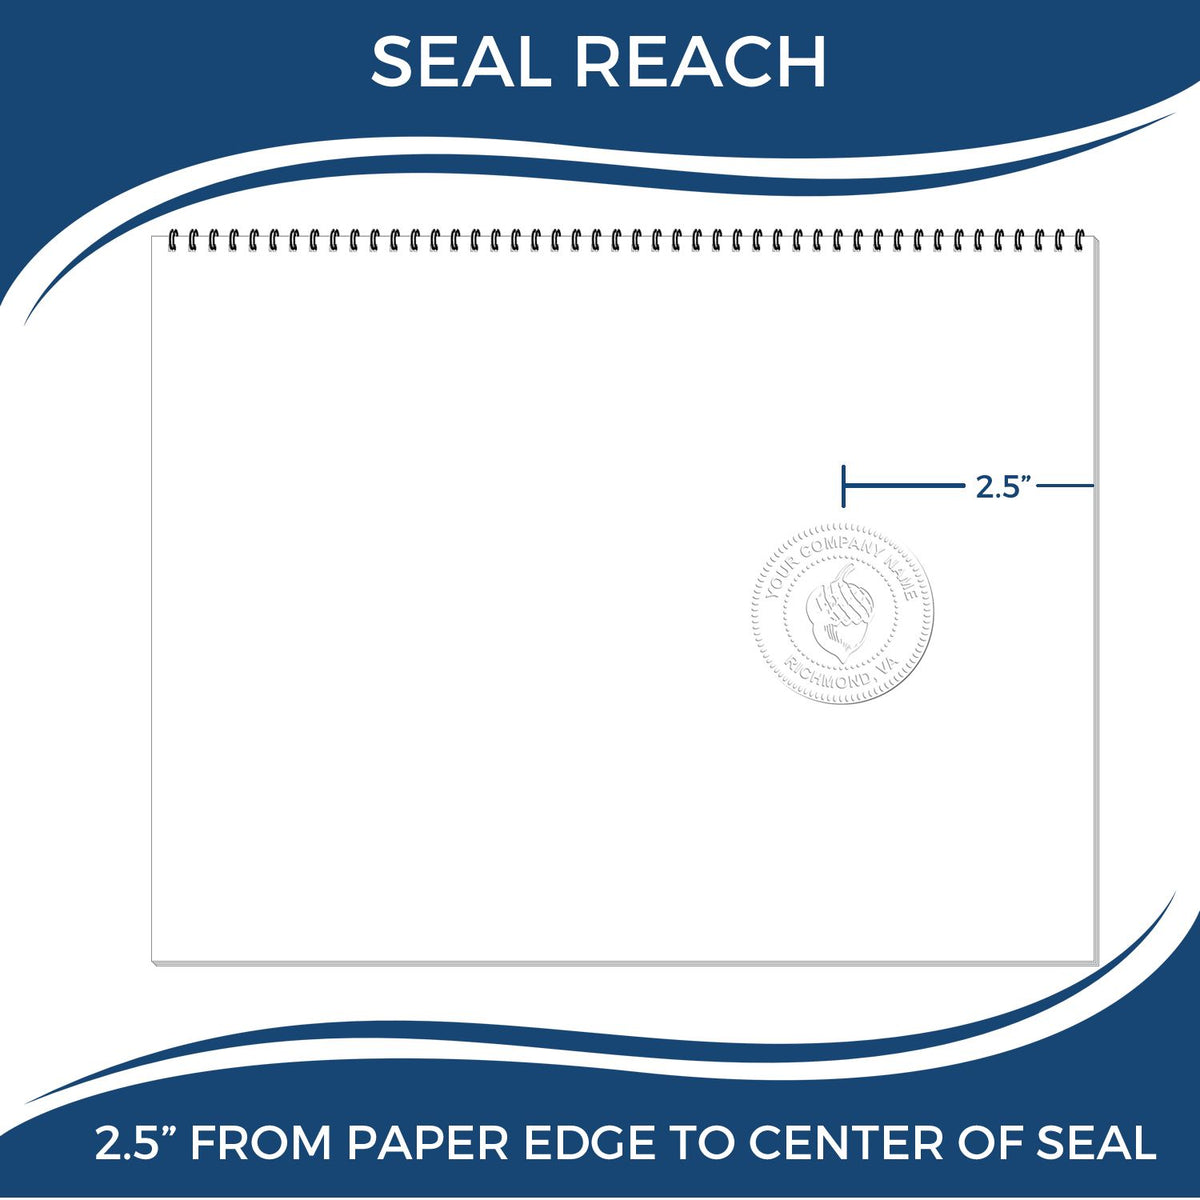 An infographic showing the seal reach which is represented by a ruler and a miniature seal image of the Heavy Duty Cast Iron Alabama Engineer Seal Embosser